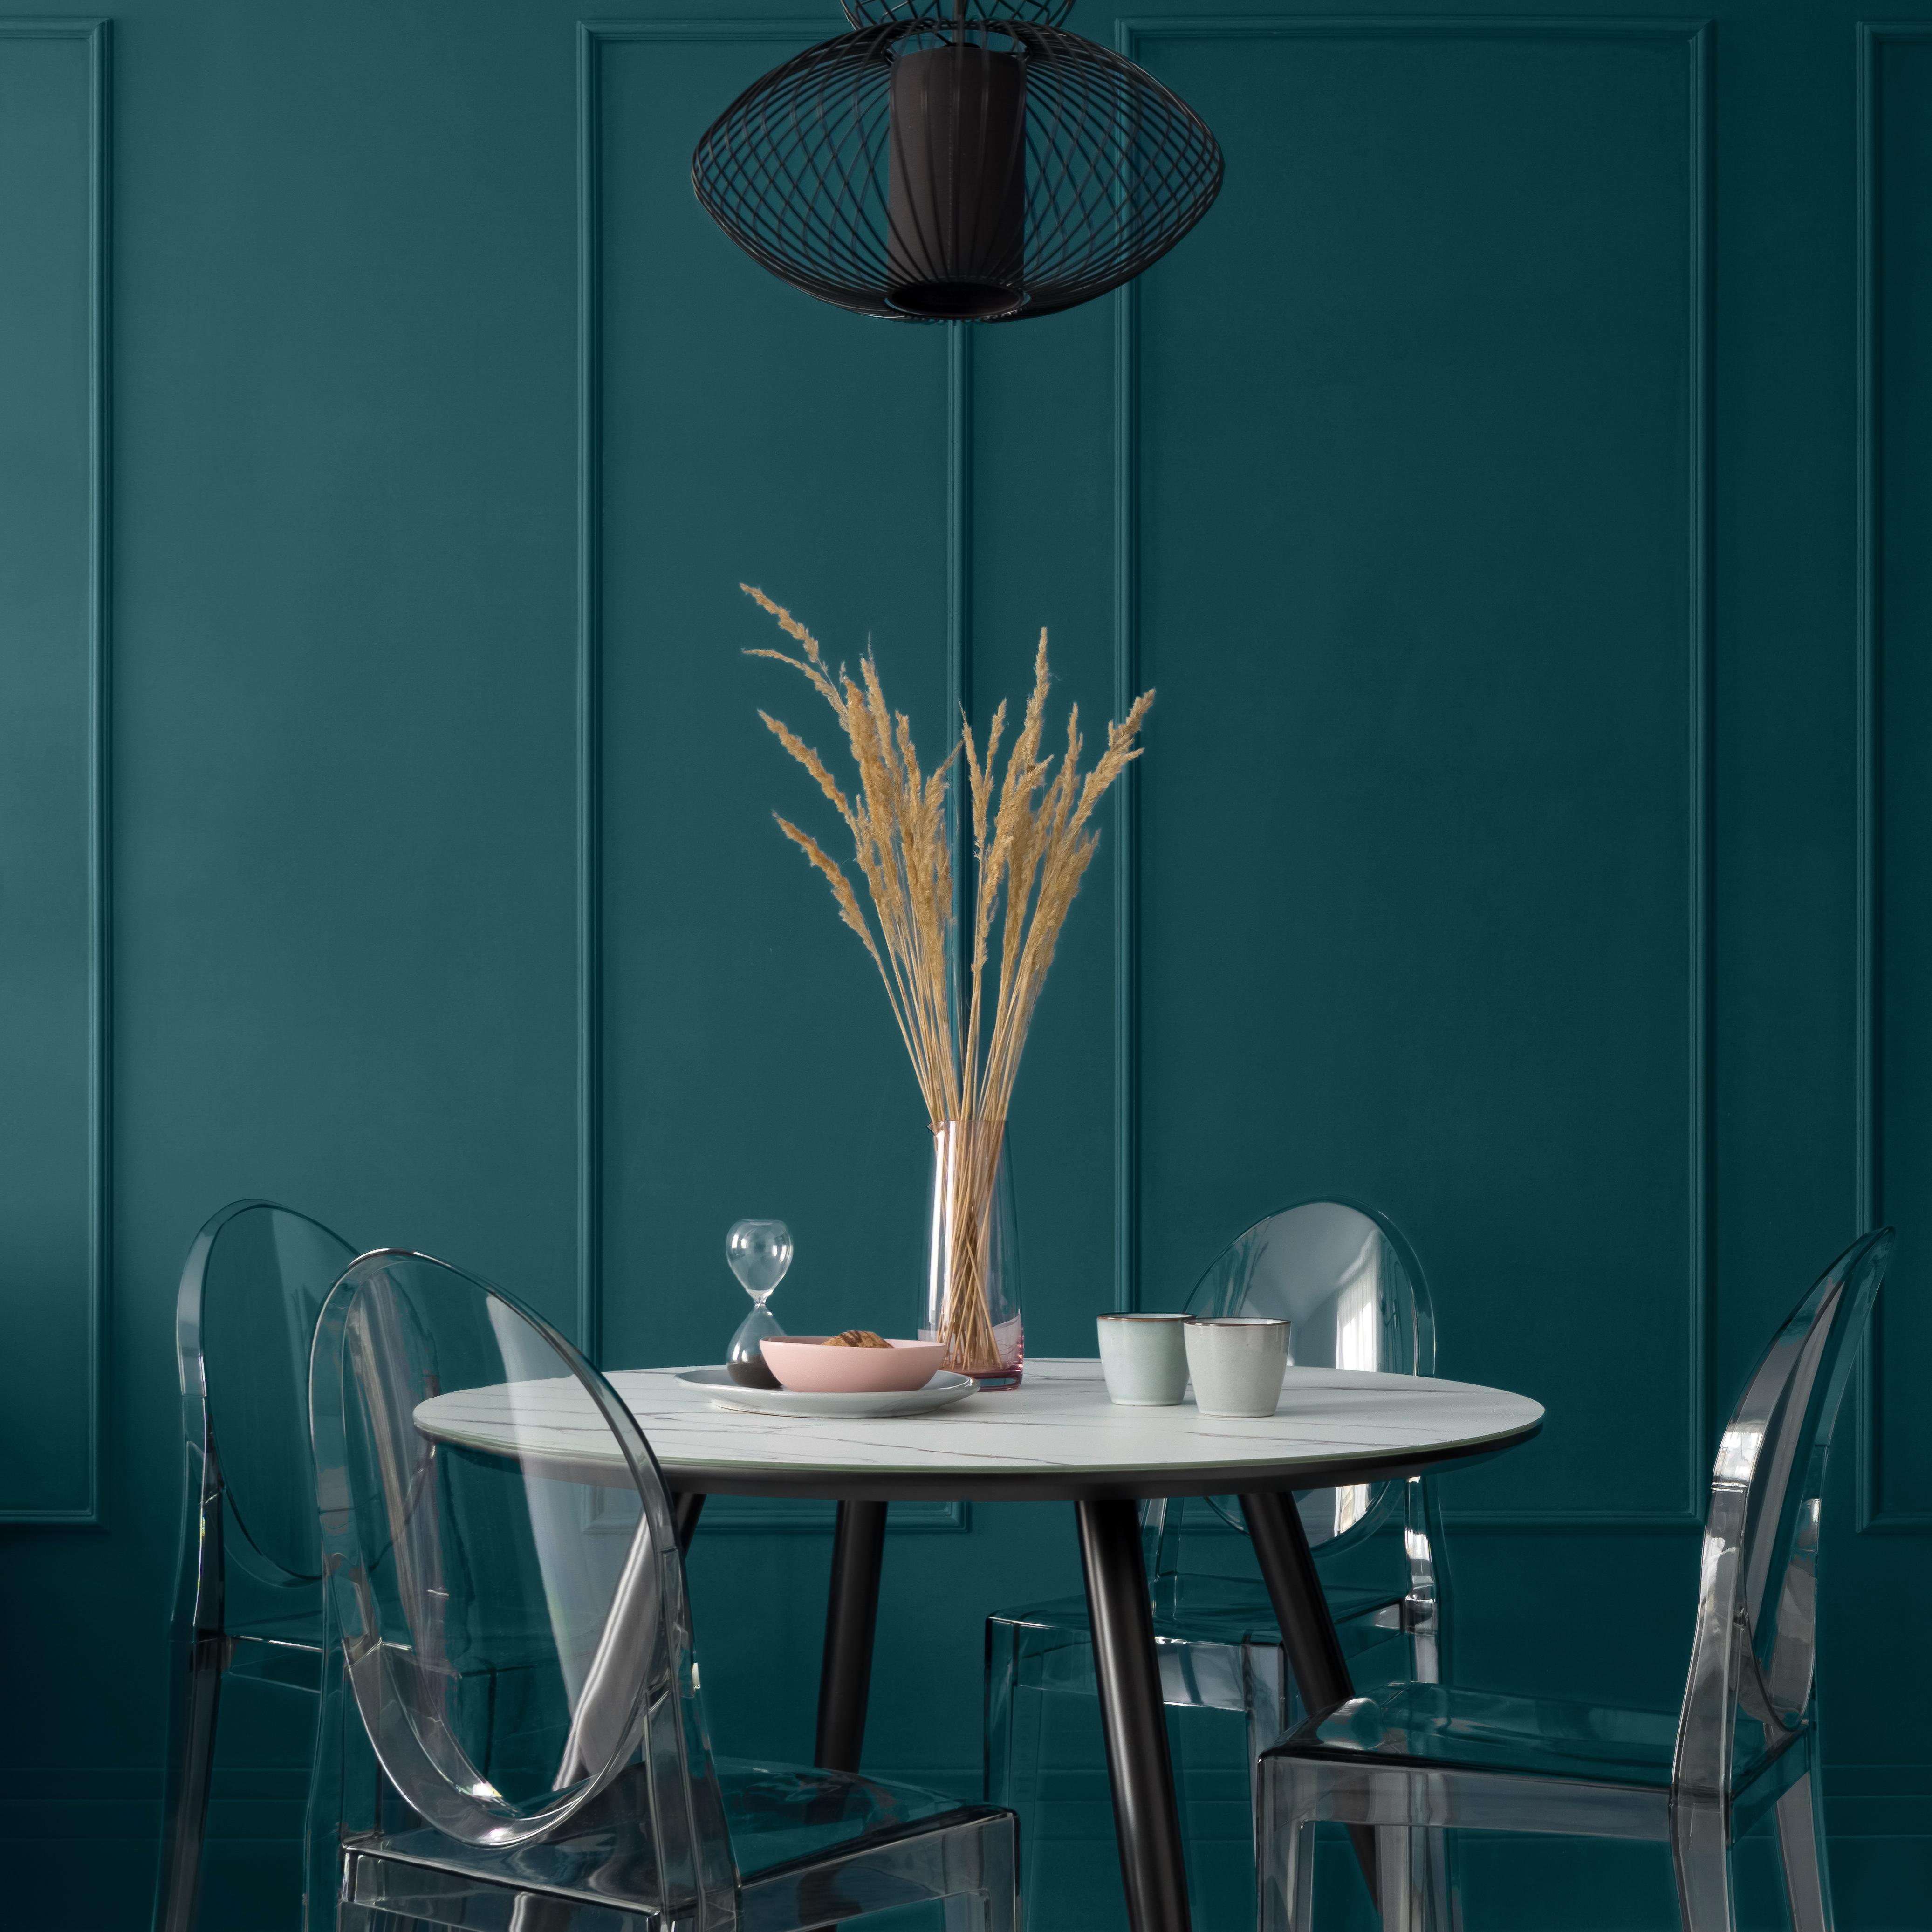 Fancy dining room with blue-green wall with molding and with modern table with black legs and marble style countertop, nice table decorations, four, new plastic chairs under black pendant lamp. The wall being featured is was painted in a deep teal color called Ocean Abyss. 